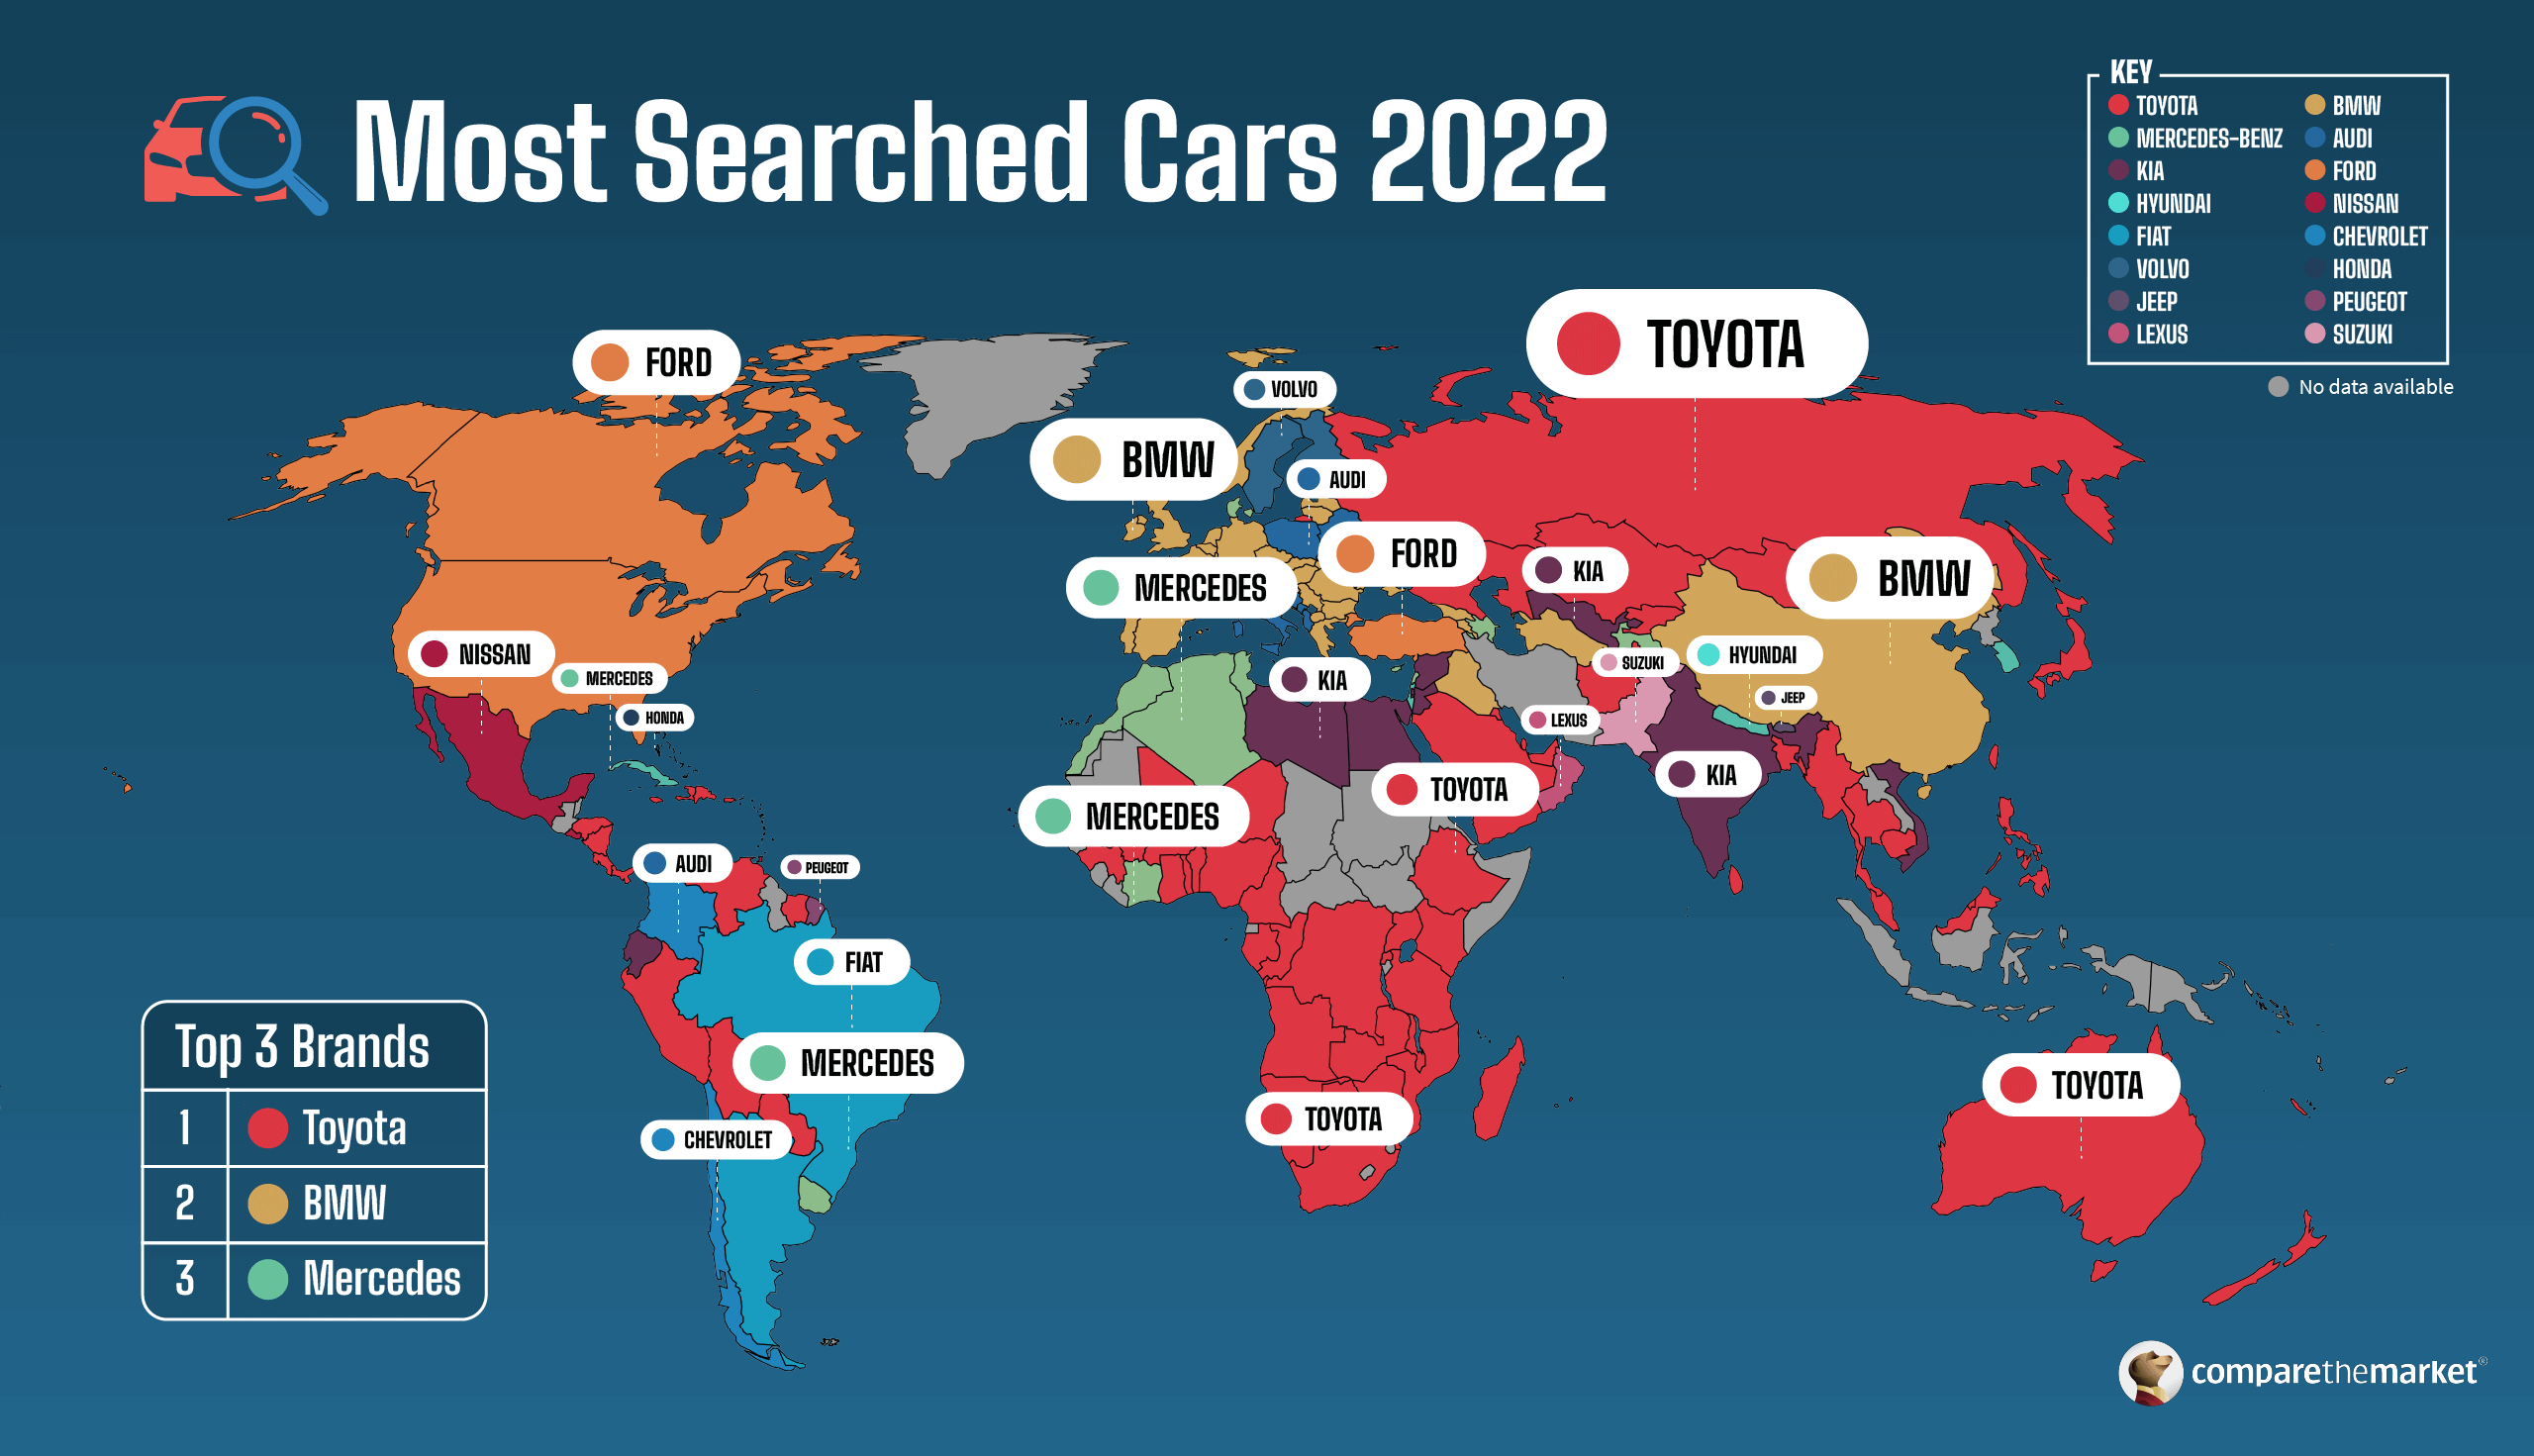 World map showing the most searched car brand in each country.